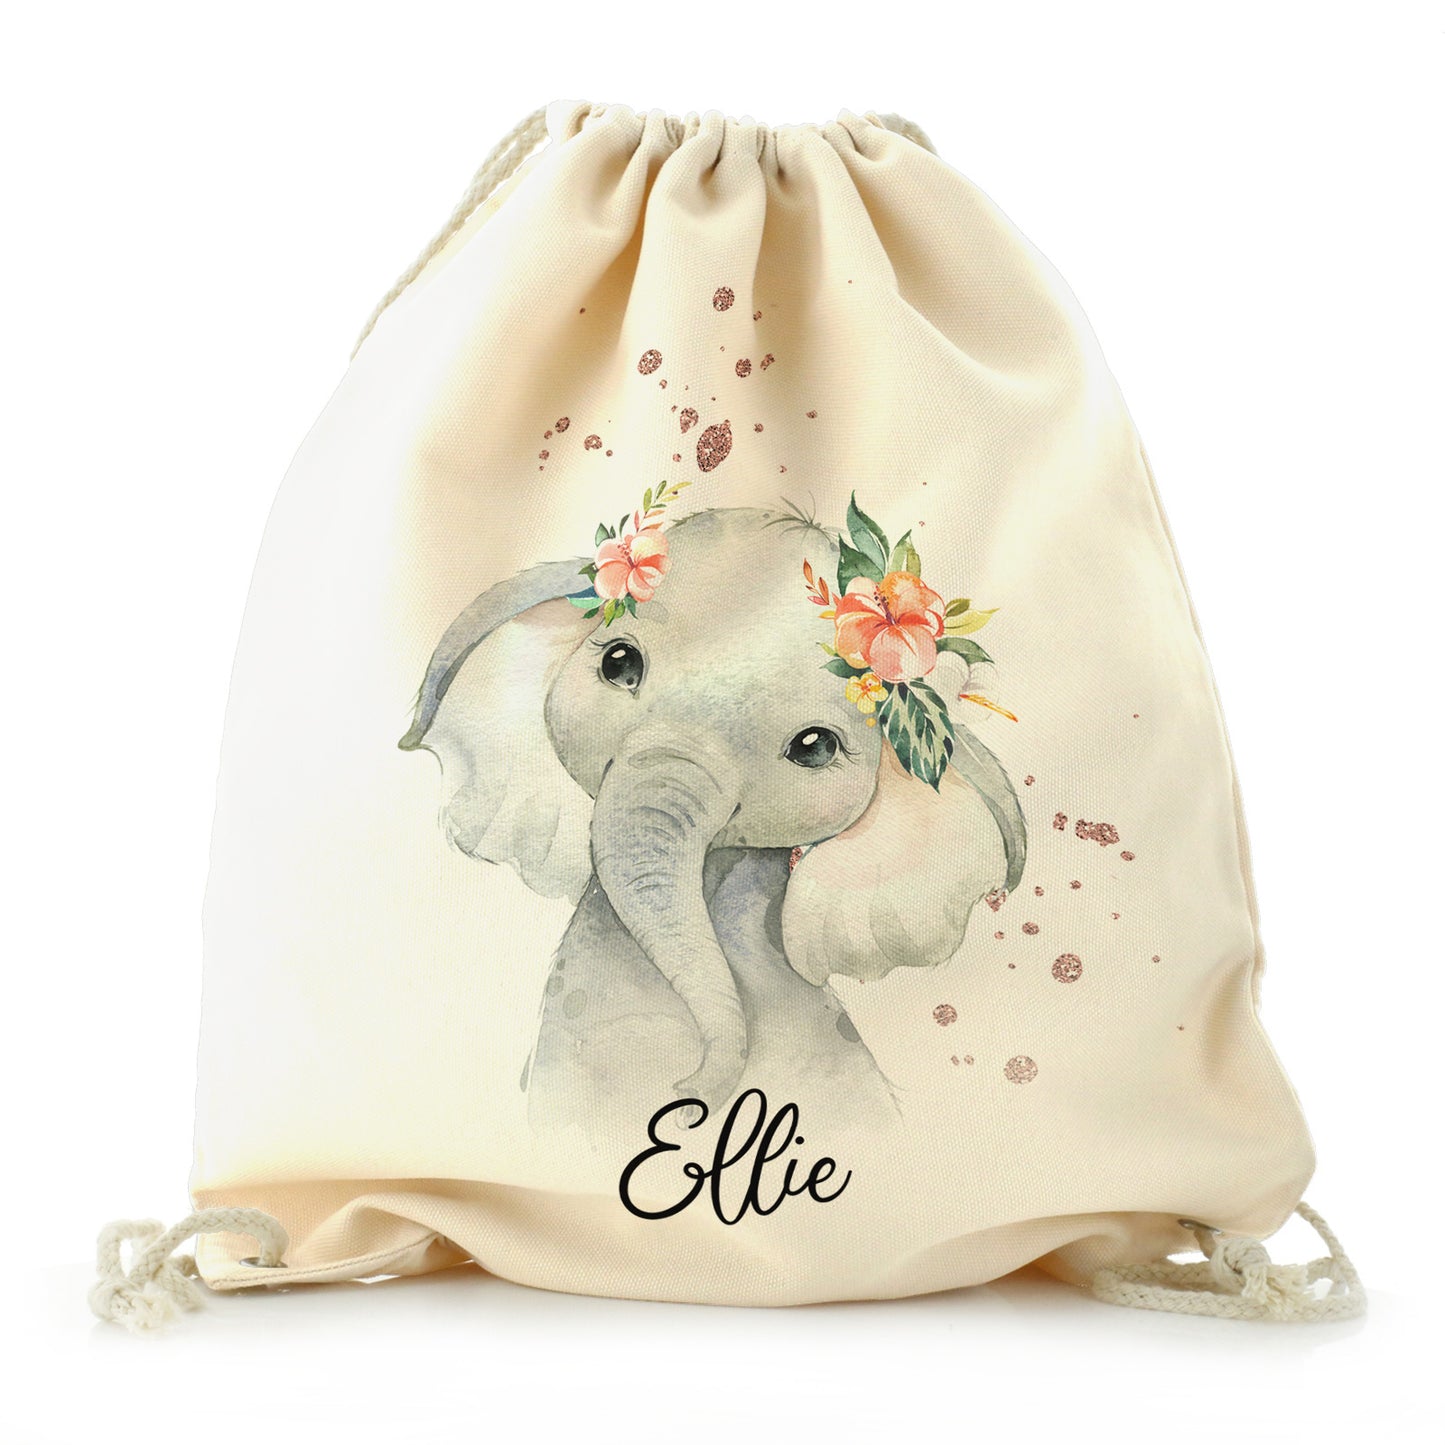 Personalised Canvas Drawstring Backpack with Elephant Rain Drop Glitter Print and Cute Text